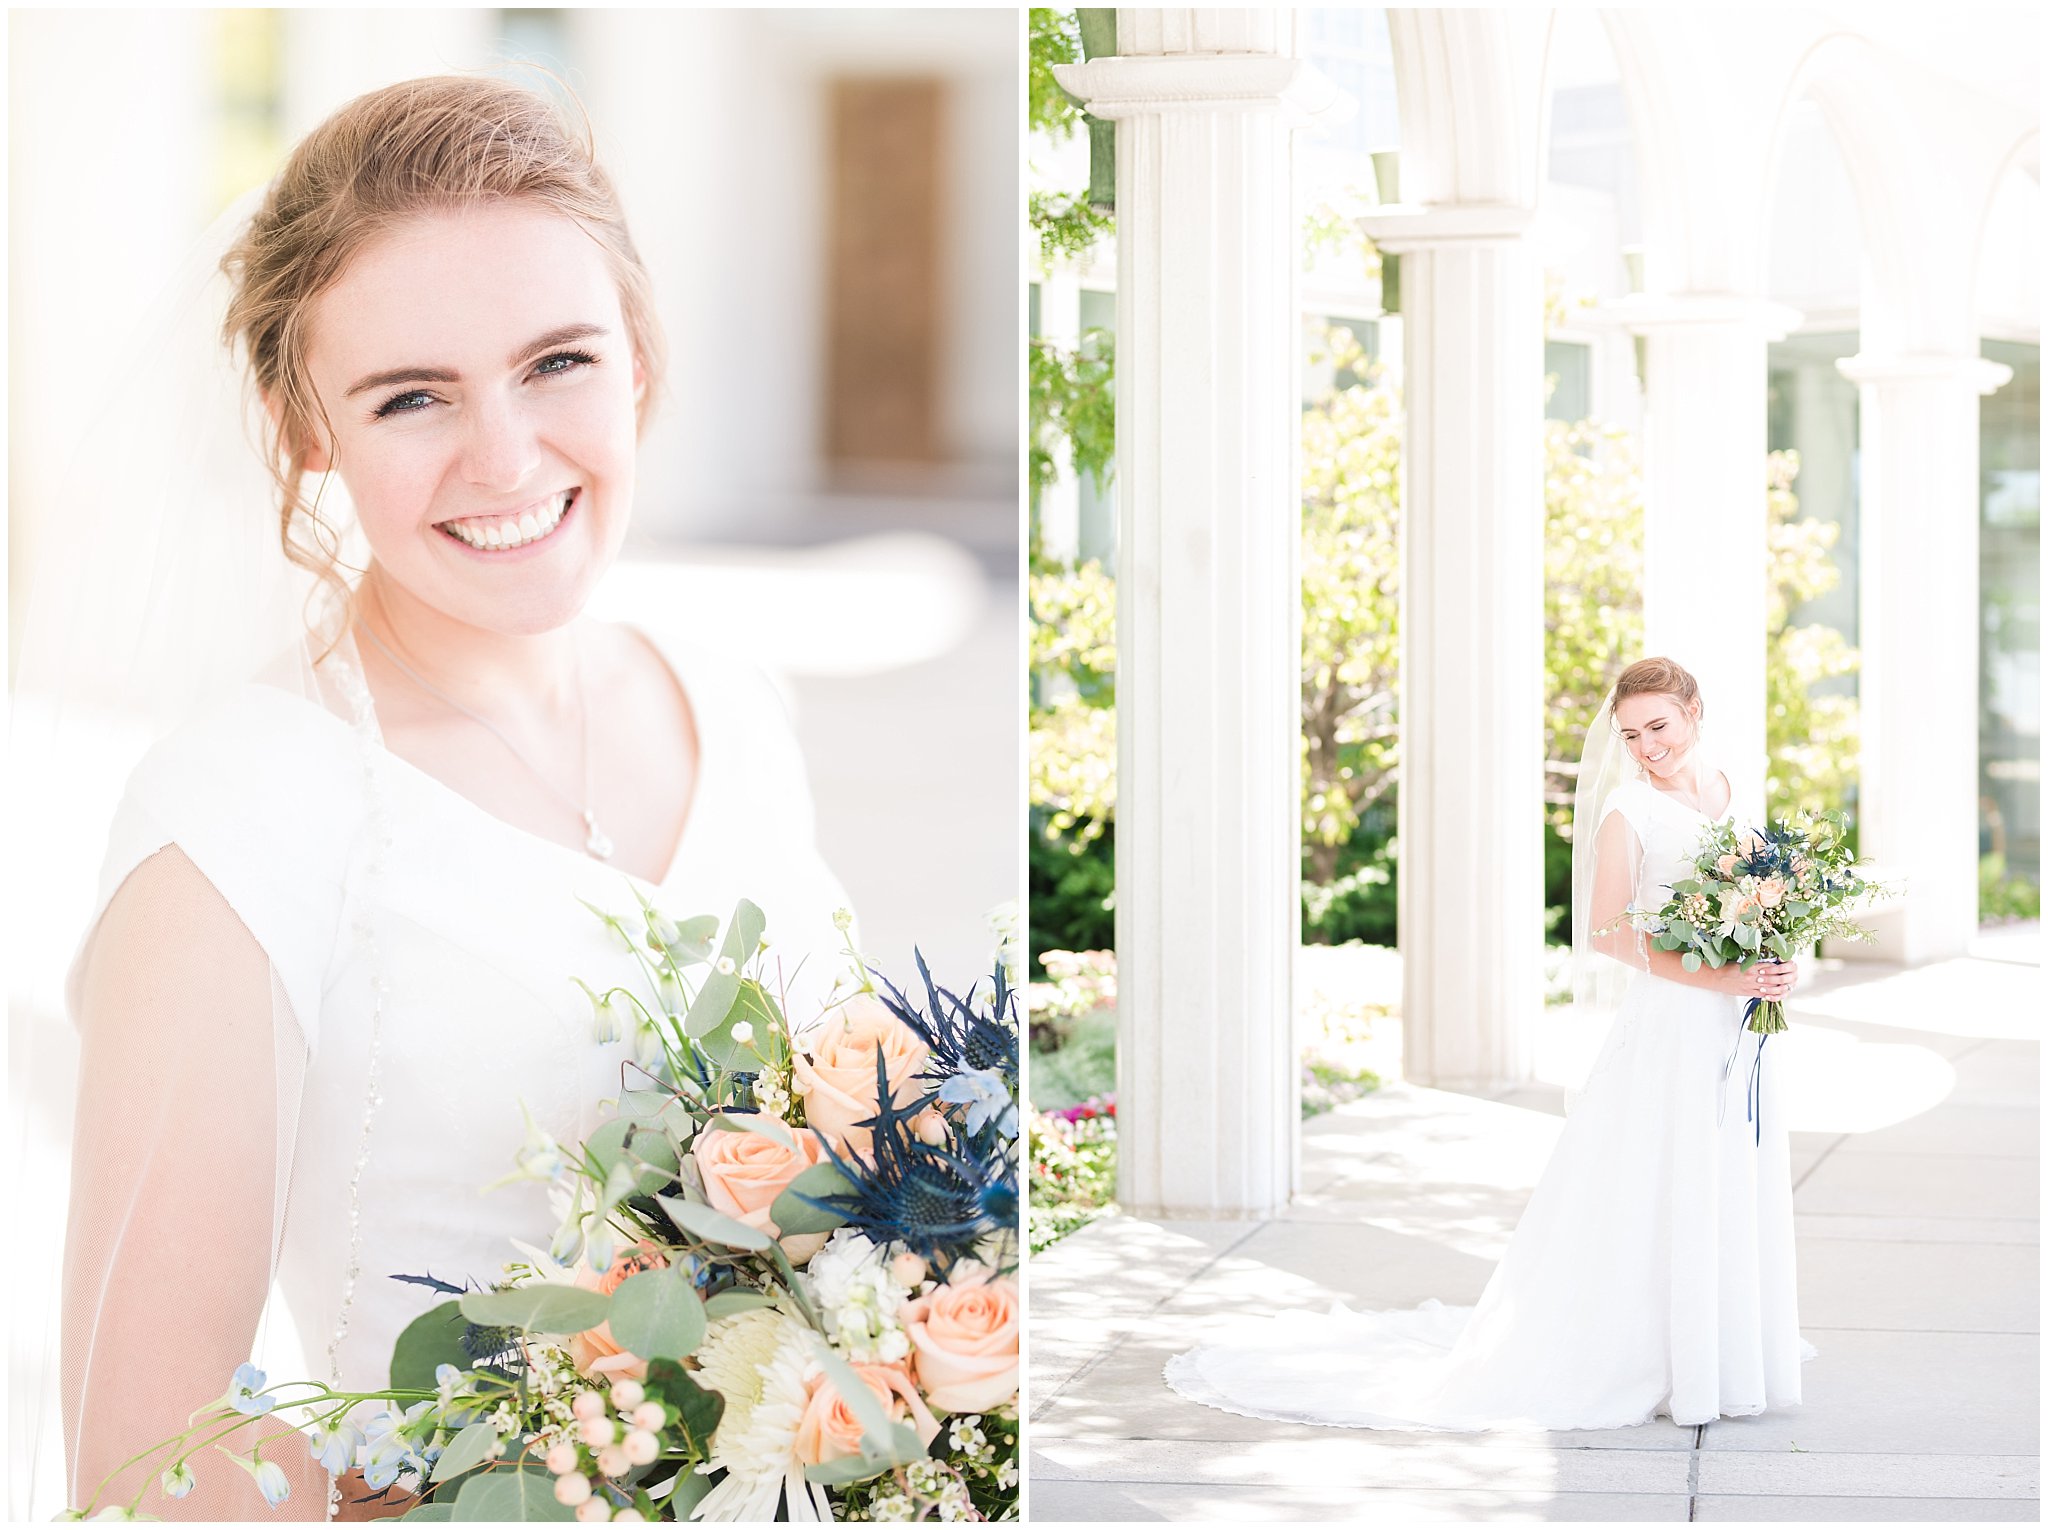 Bride and Groom portraits on wedding day | Bride wearing simple, elegant dress and veil with blue thistle bouquet | Bountiful Temple Wedding and Oak Hills Reception | Jessie and Dallin Photography